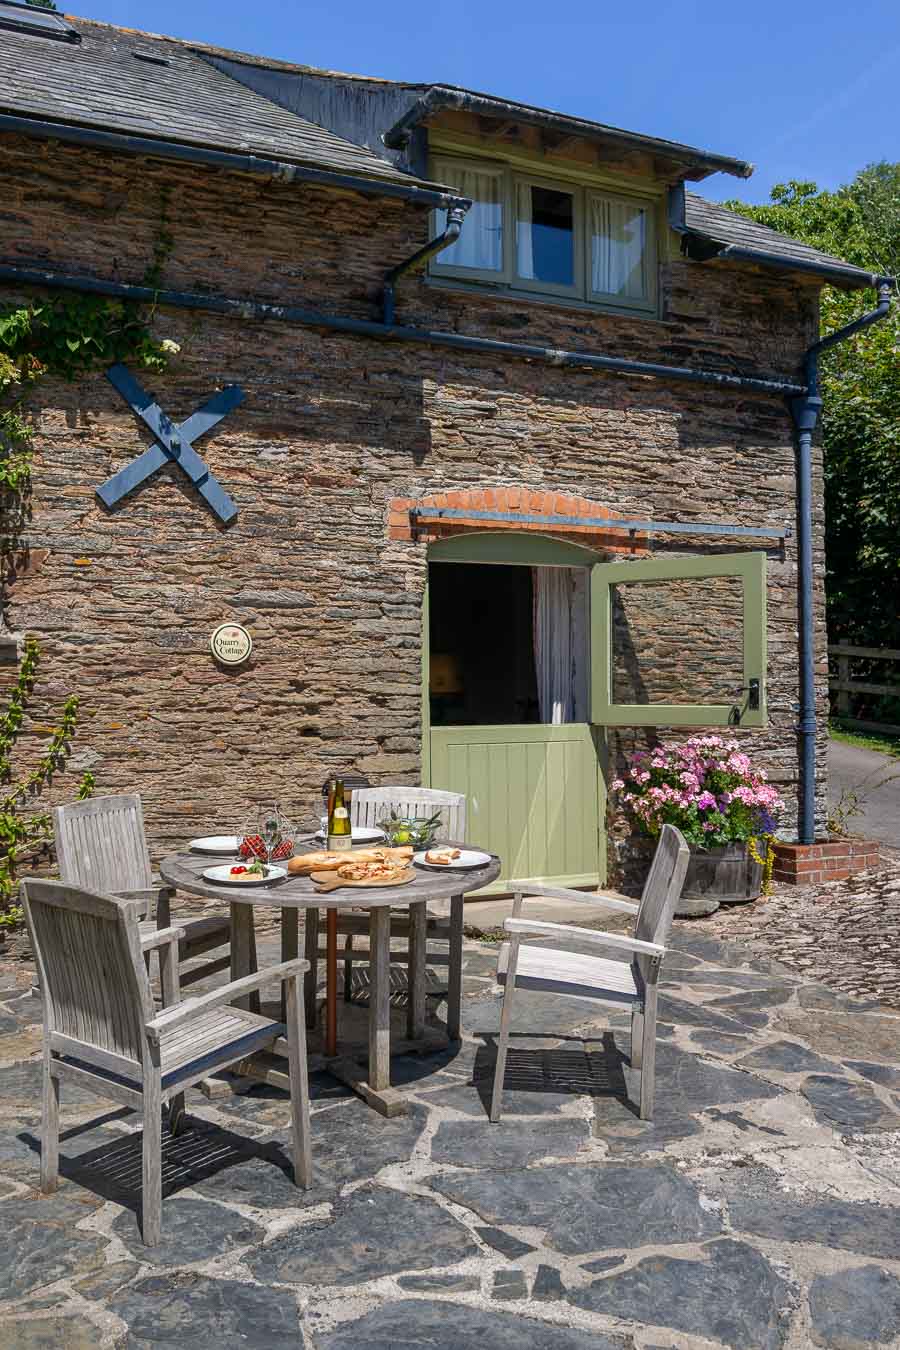 The stable door and original slate and stone of Quarry cottage Flear Farm. With wooden outdoor furniture for four and slate patio area looking onto the rolling green Devon hills. 